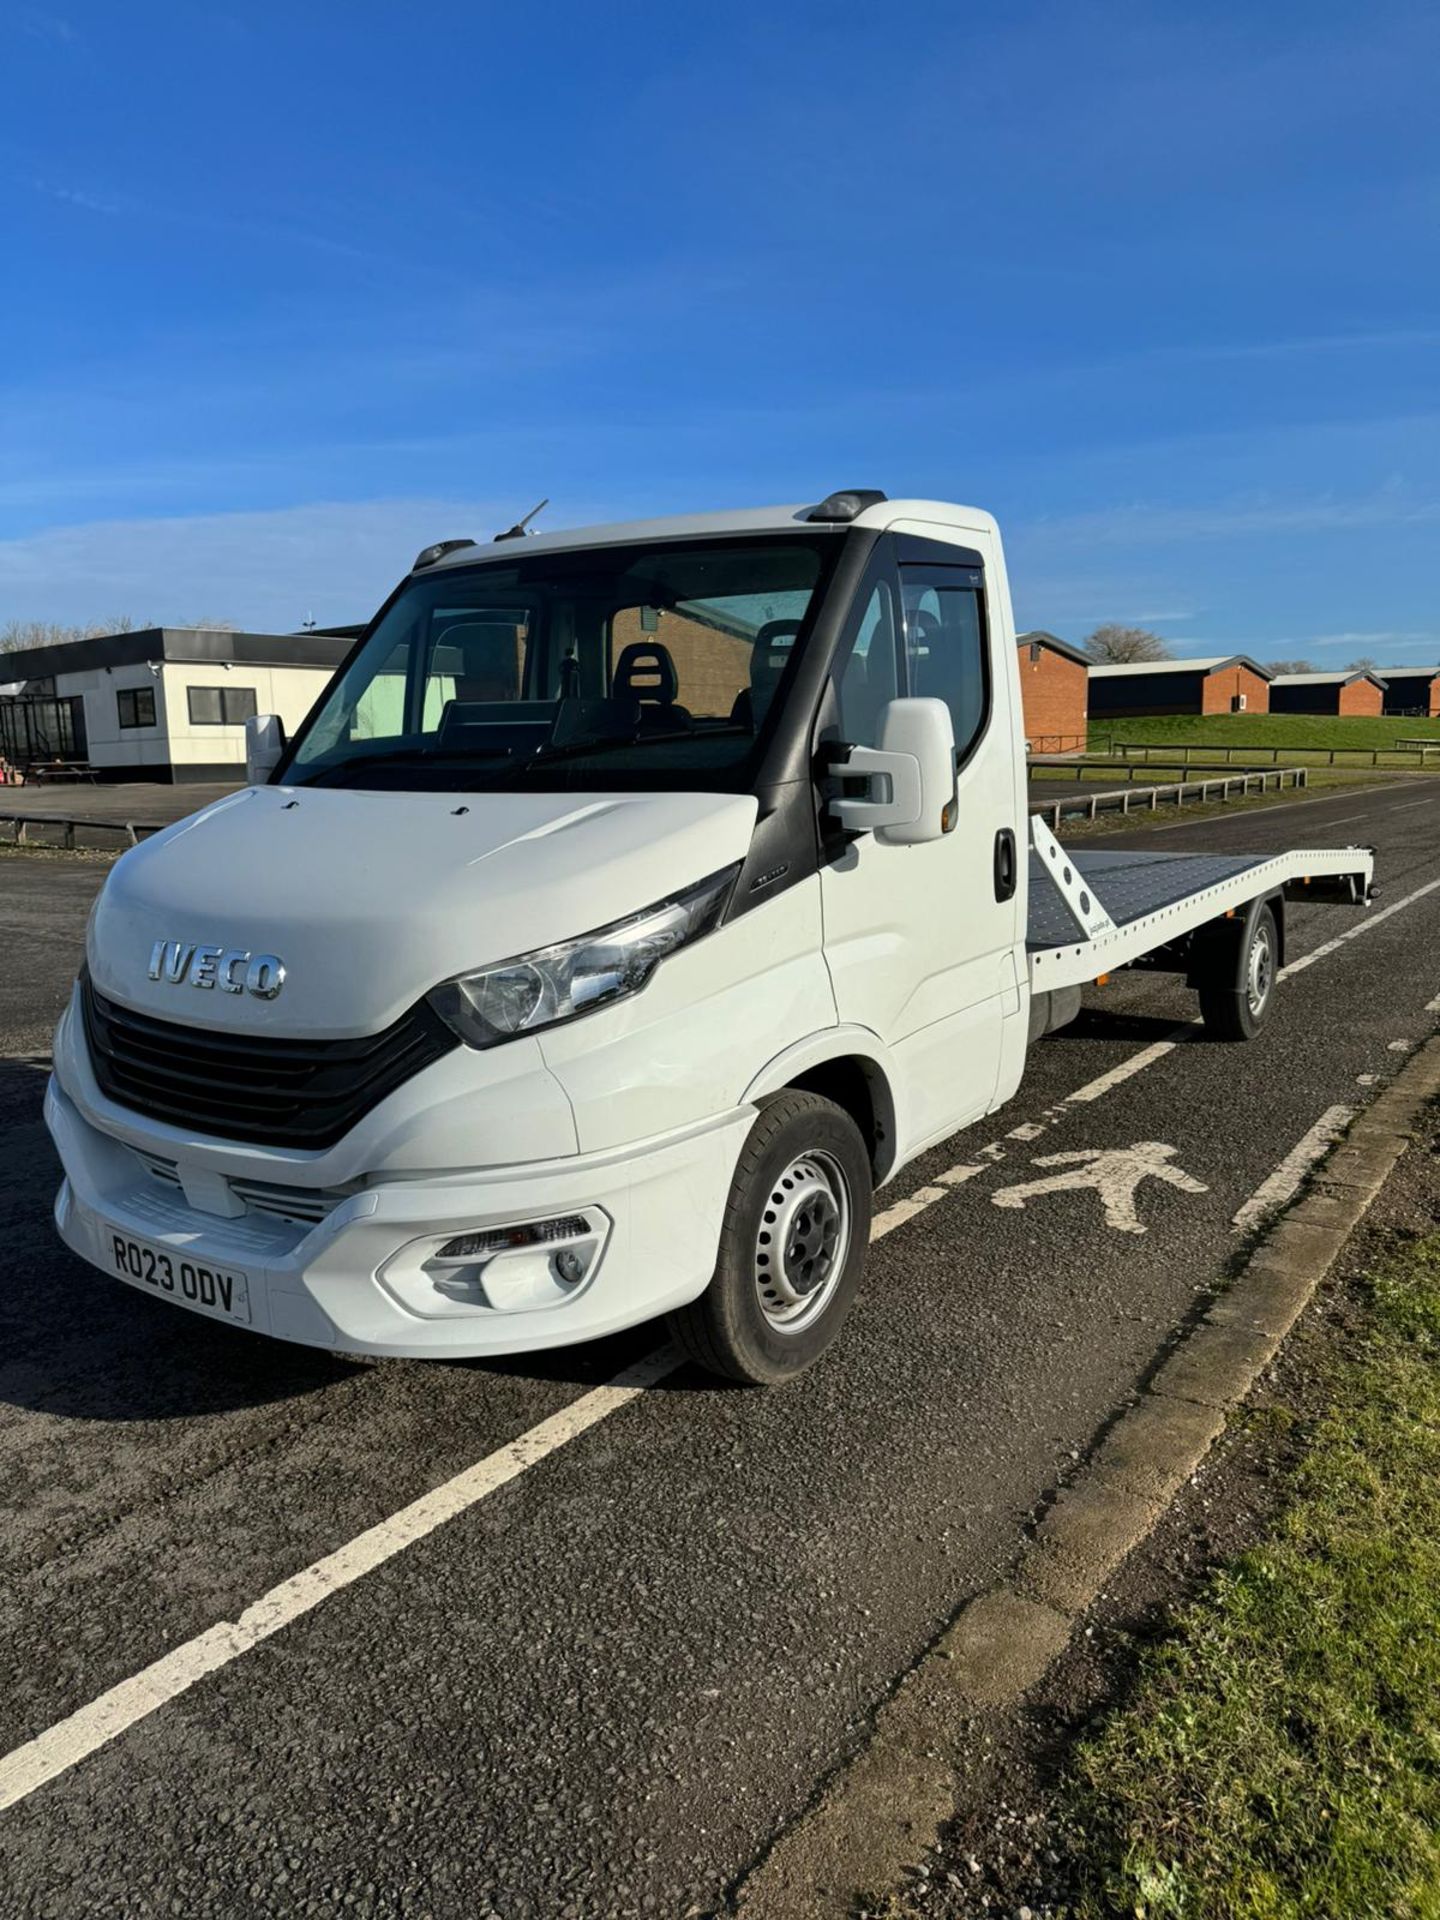 2023 23 IVECO DAILY RECOVERY TRUCK - 12K MILES - NEW ALIUMIUN BODY JUST FITTED - WINCH - Image 2 of 9